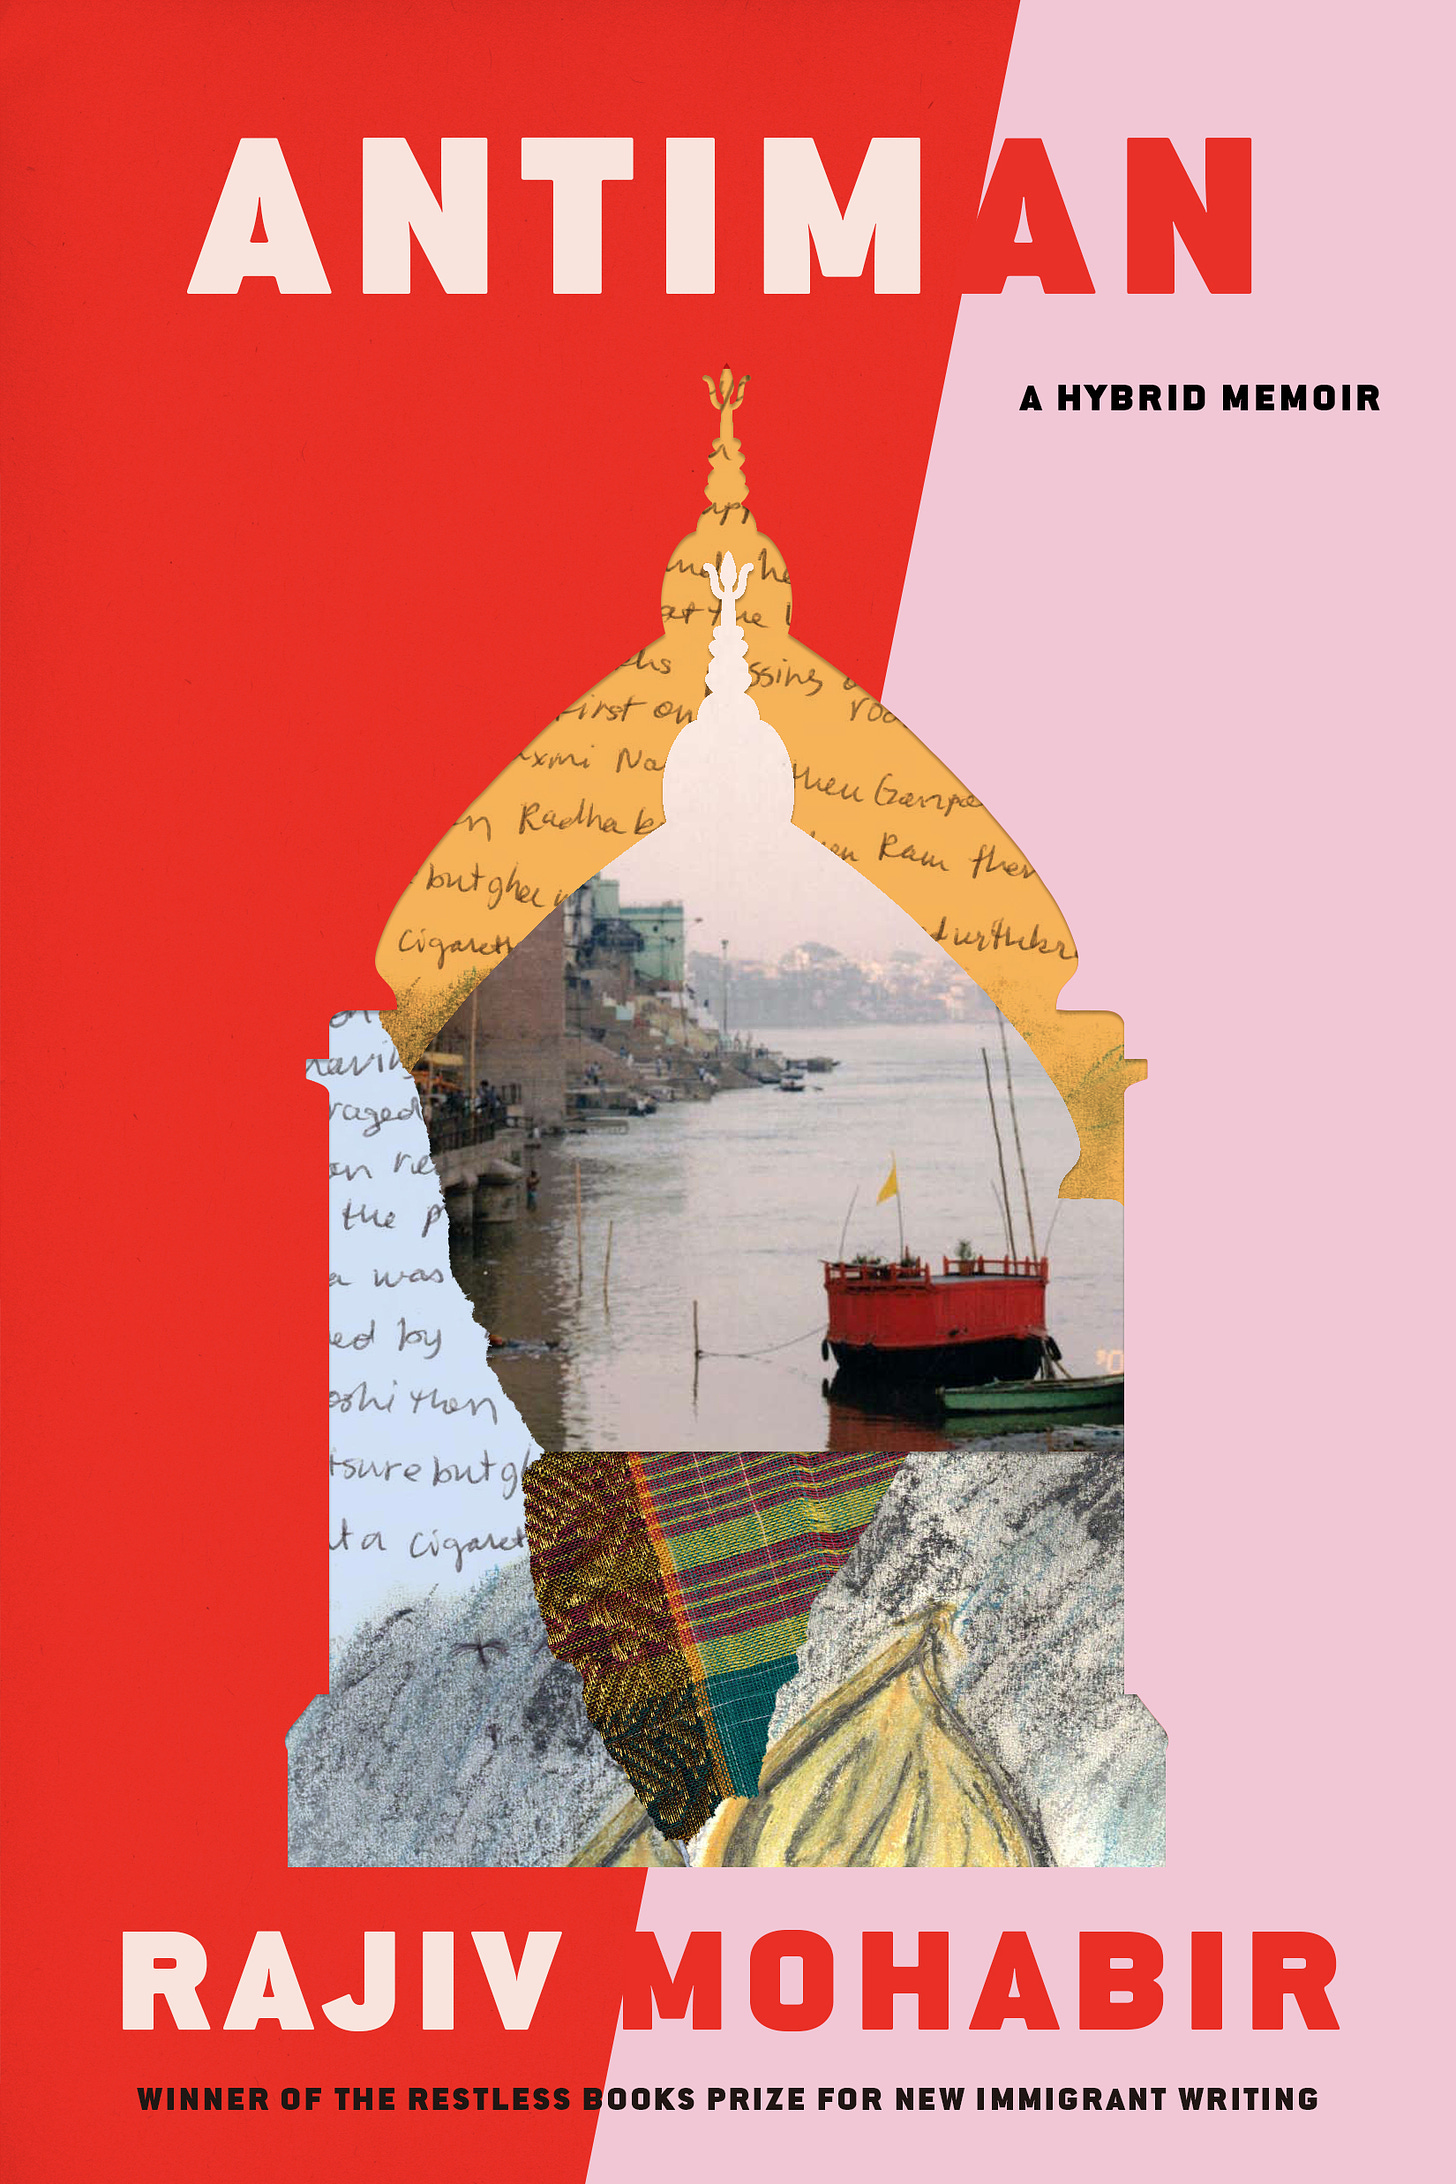 Cover of Antiman. The background is red and pink, and there is a collaged image of what could be a person wearing a turban, composed of a photo of a boat on water, scraps of writings, drawings, and fabric. Text: Antiman, A Hybrid Memoir. Rajiv Mohanir. Winner of the Restless Books Prize for New Immigrant Writing.